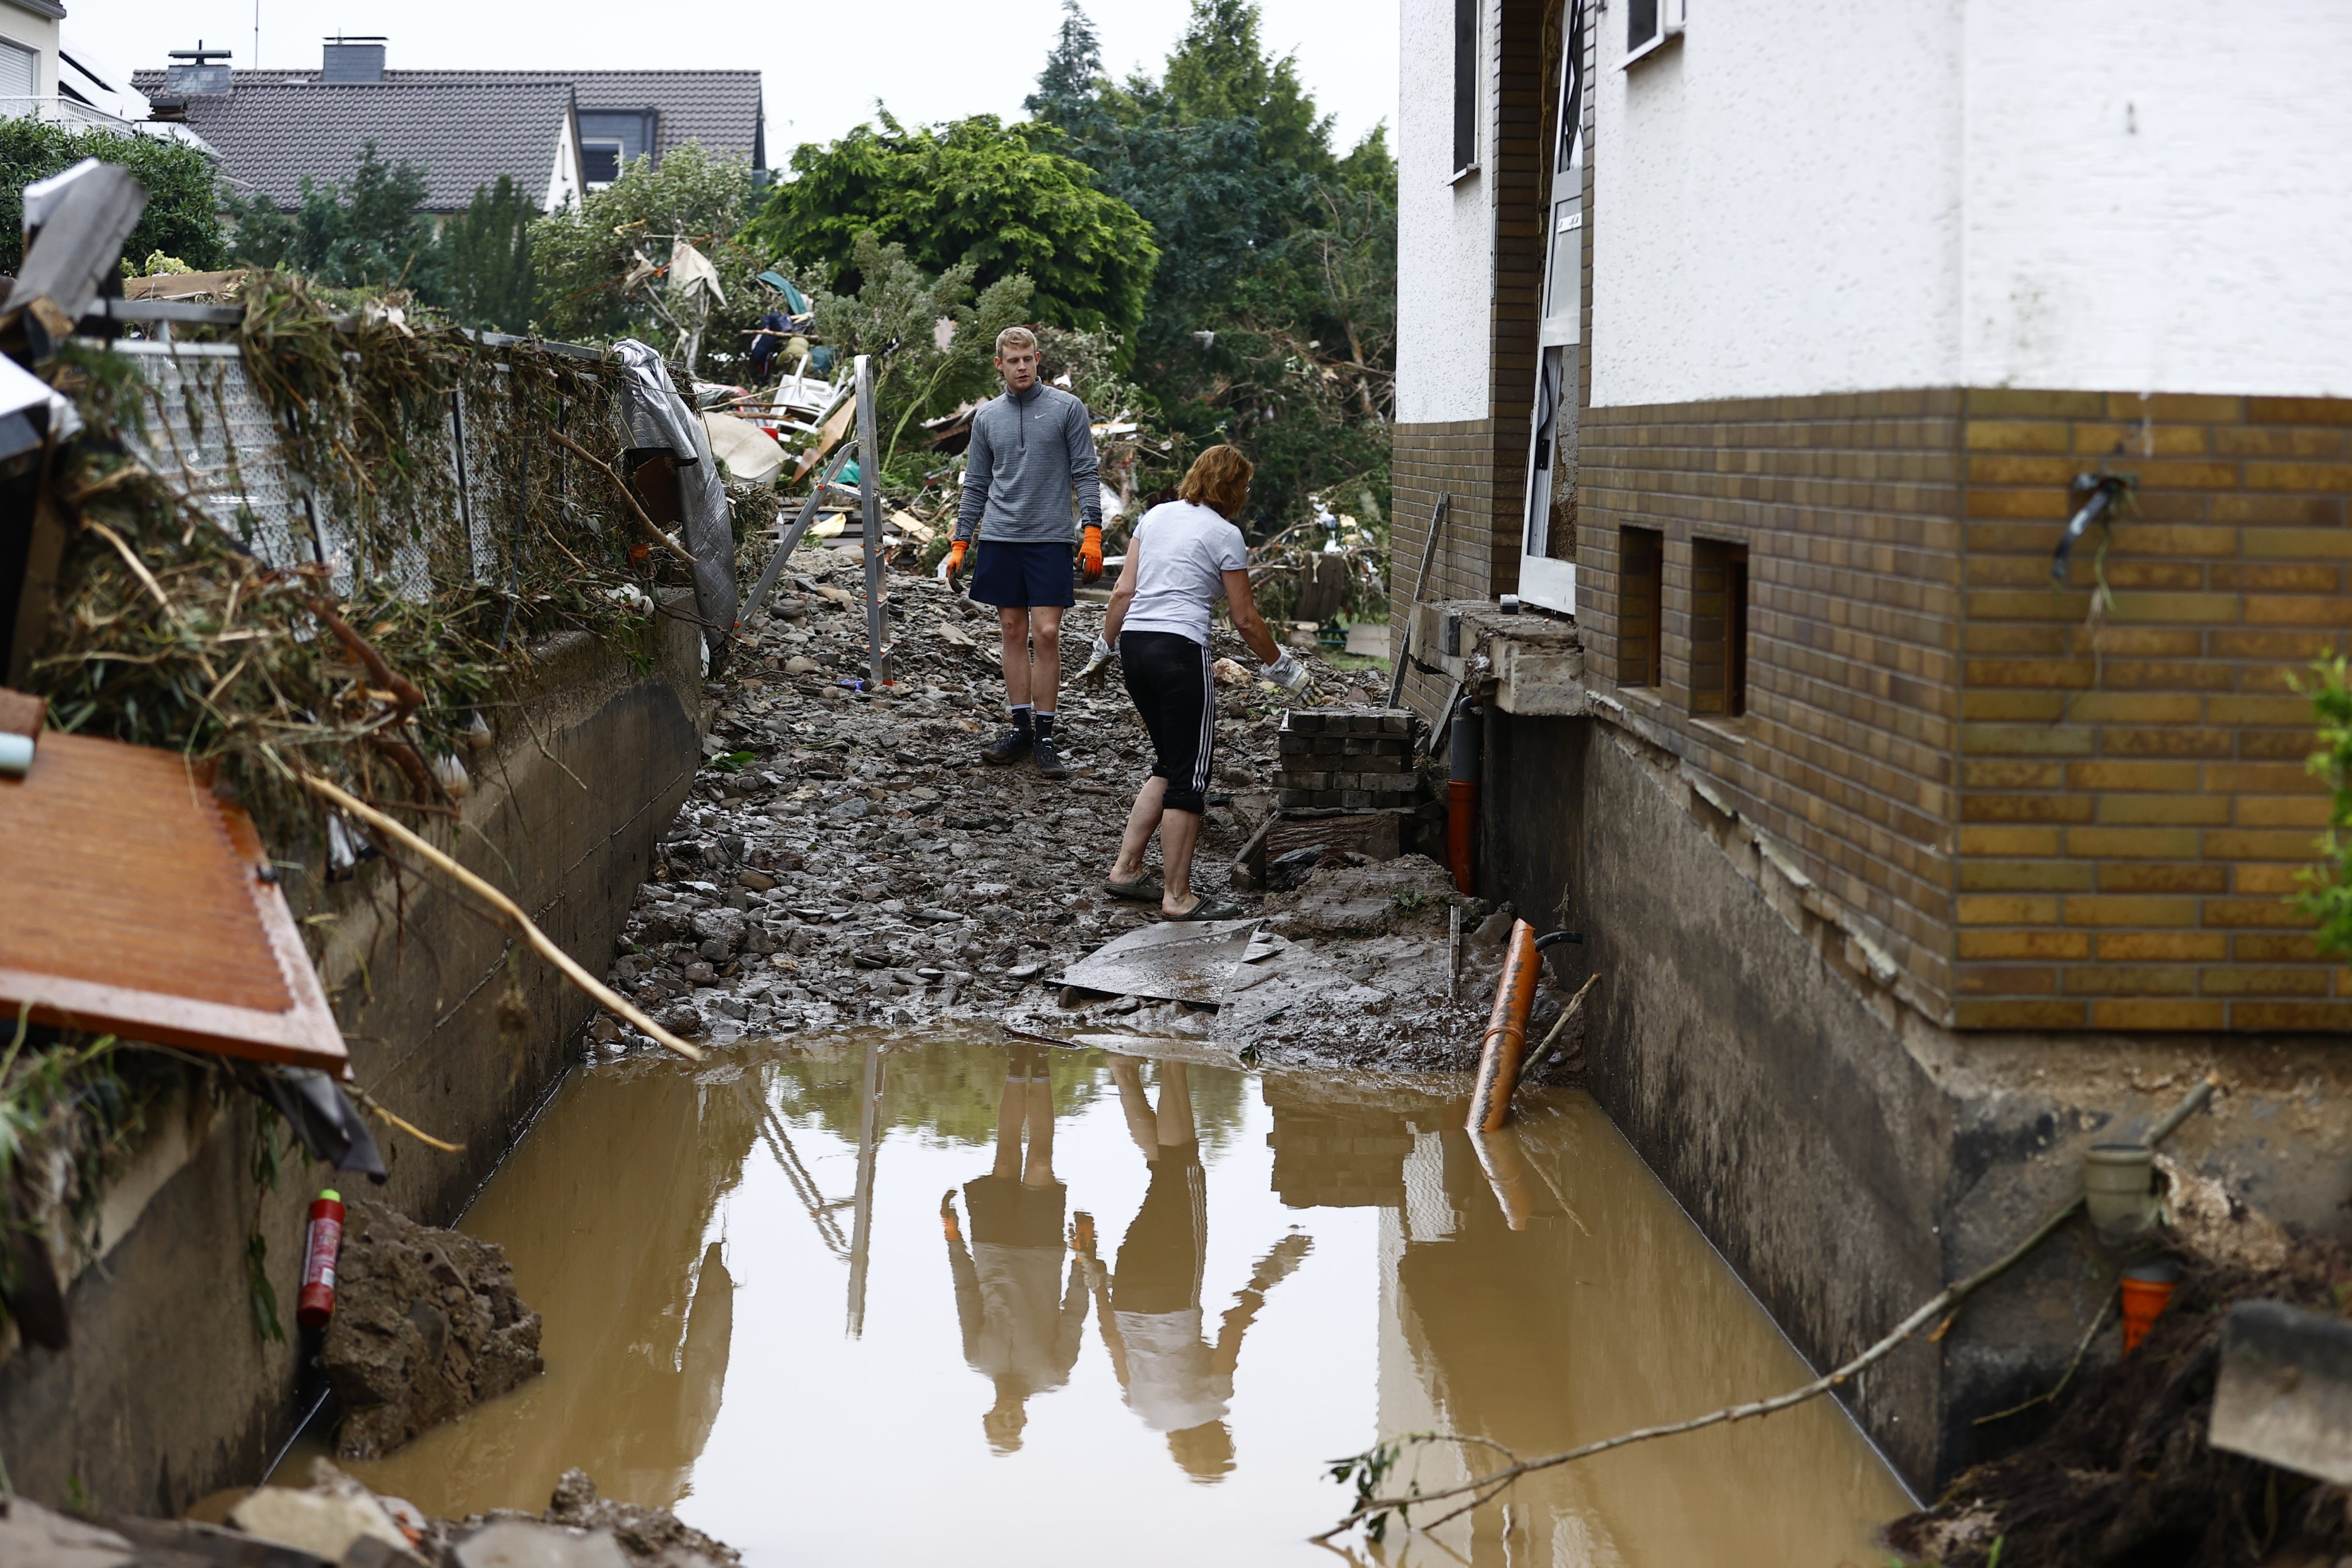 Death toll from floods in Germany rises to 81